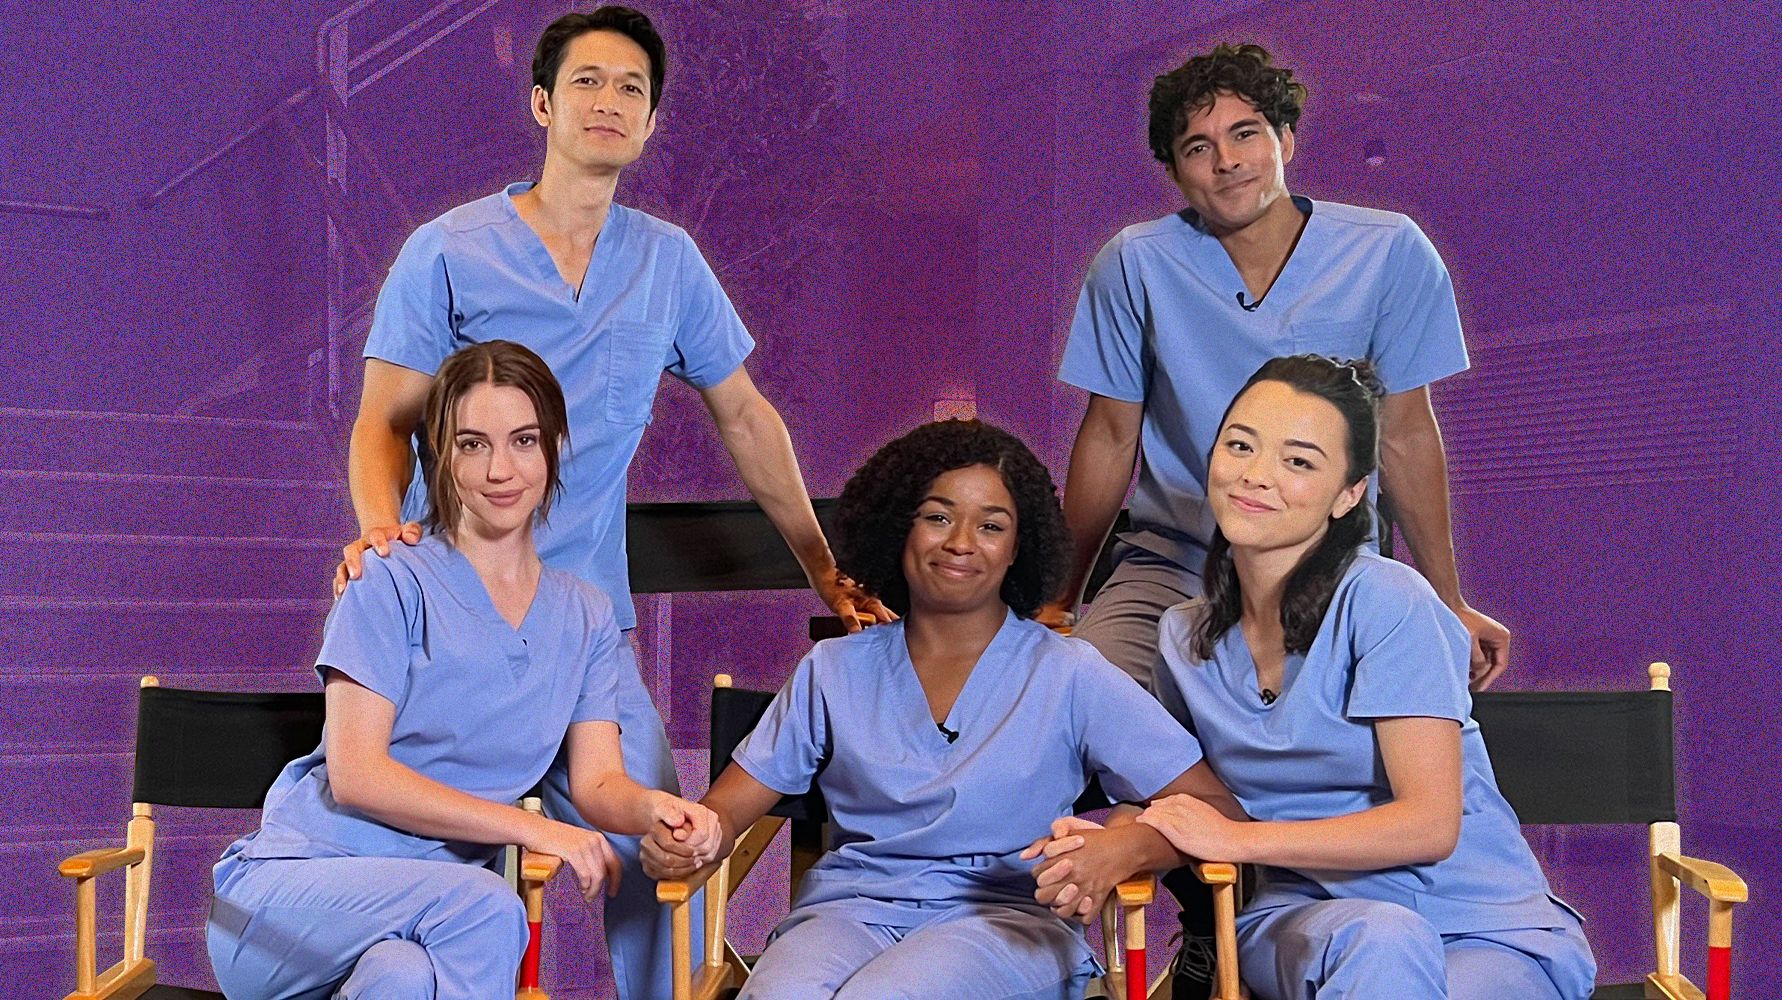 Fist Time 18 Year Sex Videos - The 5 New Interns of 'Grey's Anatomy' Reveal All the Details About Their  Debuts in a Behind-the-Scenes Interview